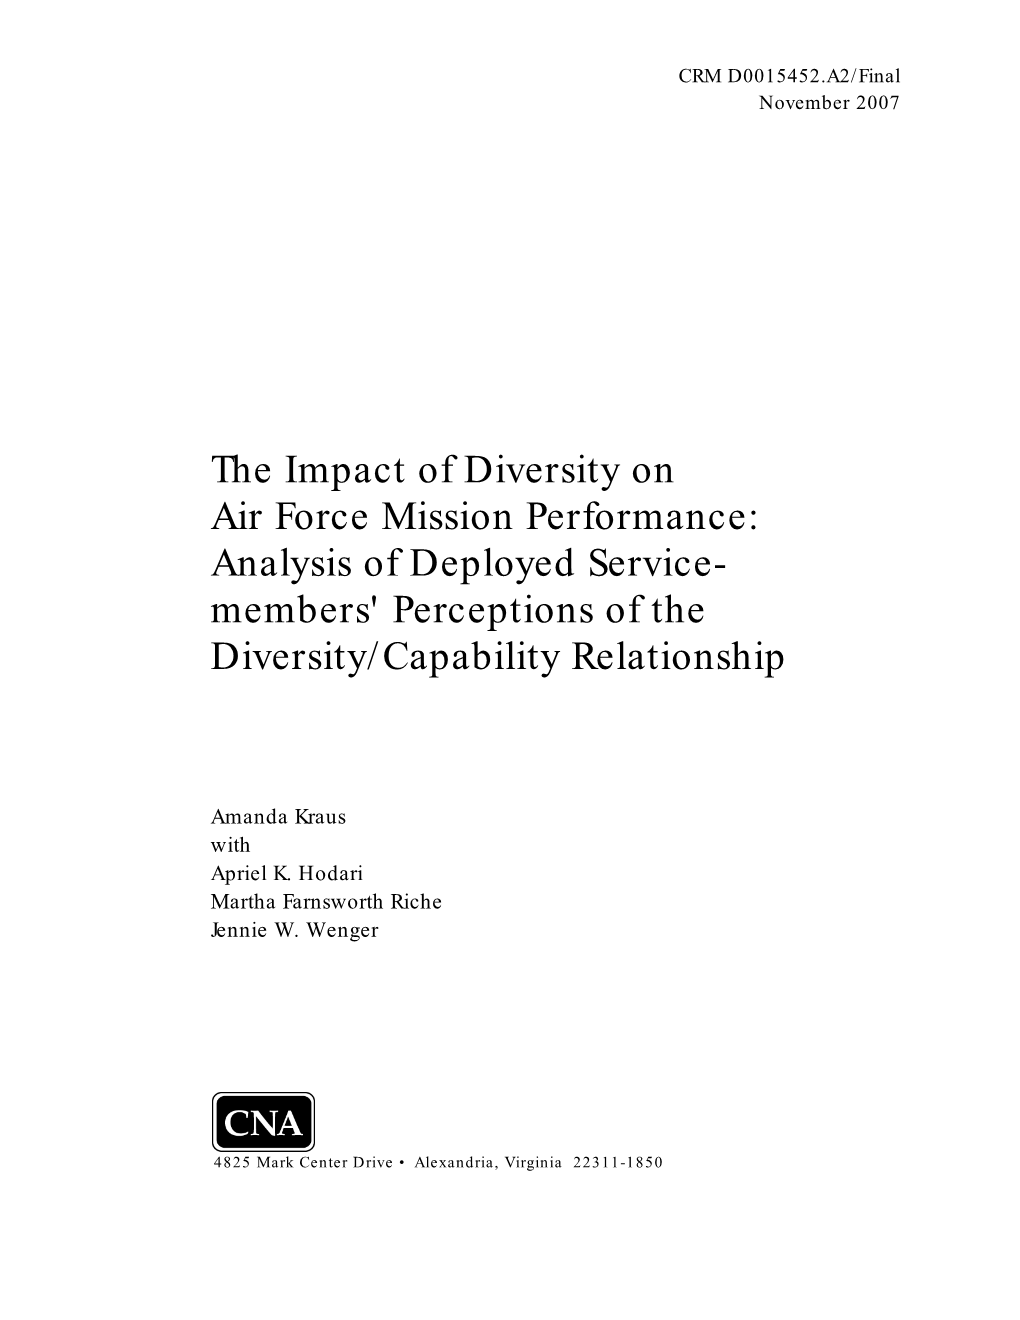 The Impact of Diversity on Air Force Mission Performance: Analysis of Deployed Service- Members' Perceptions of the Diversity/Capability Relationship